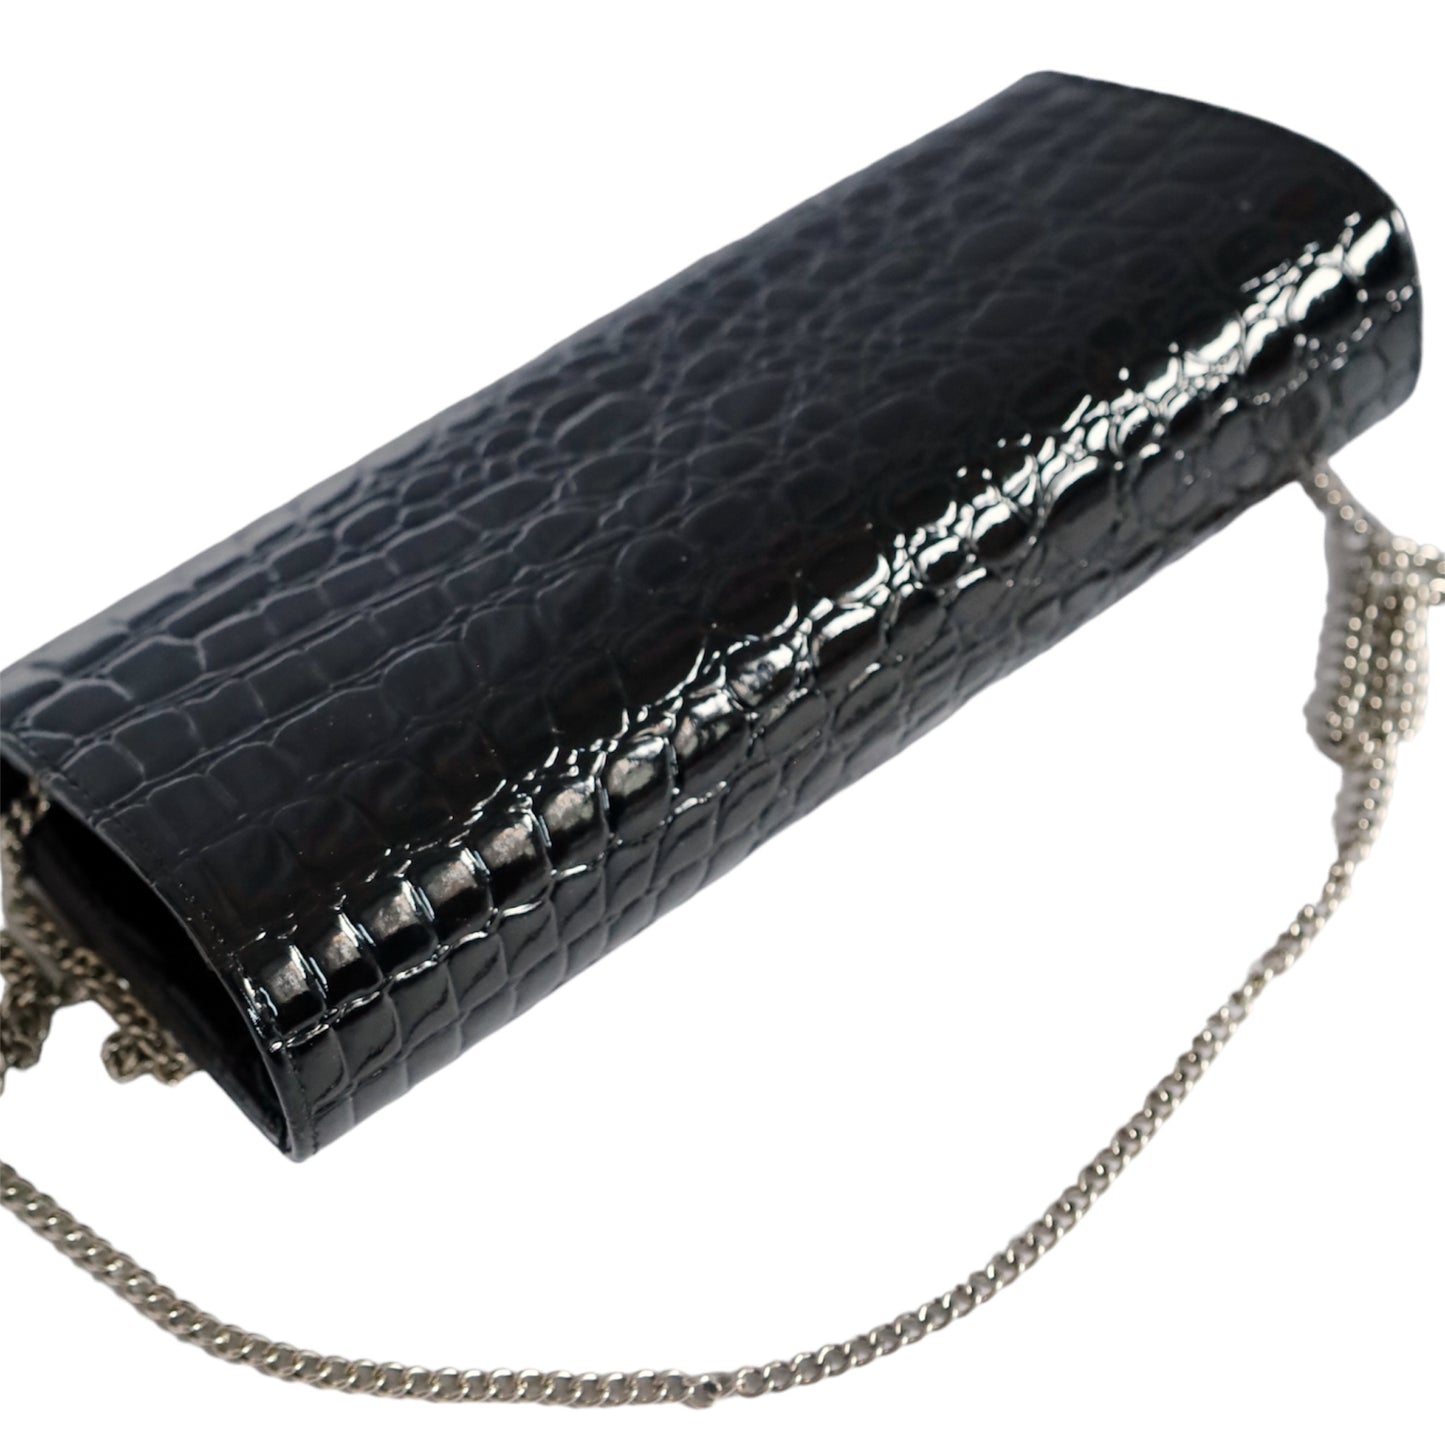 Black Patent Leather Clutch bag with Chain Strap